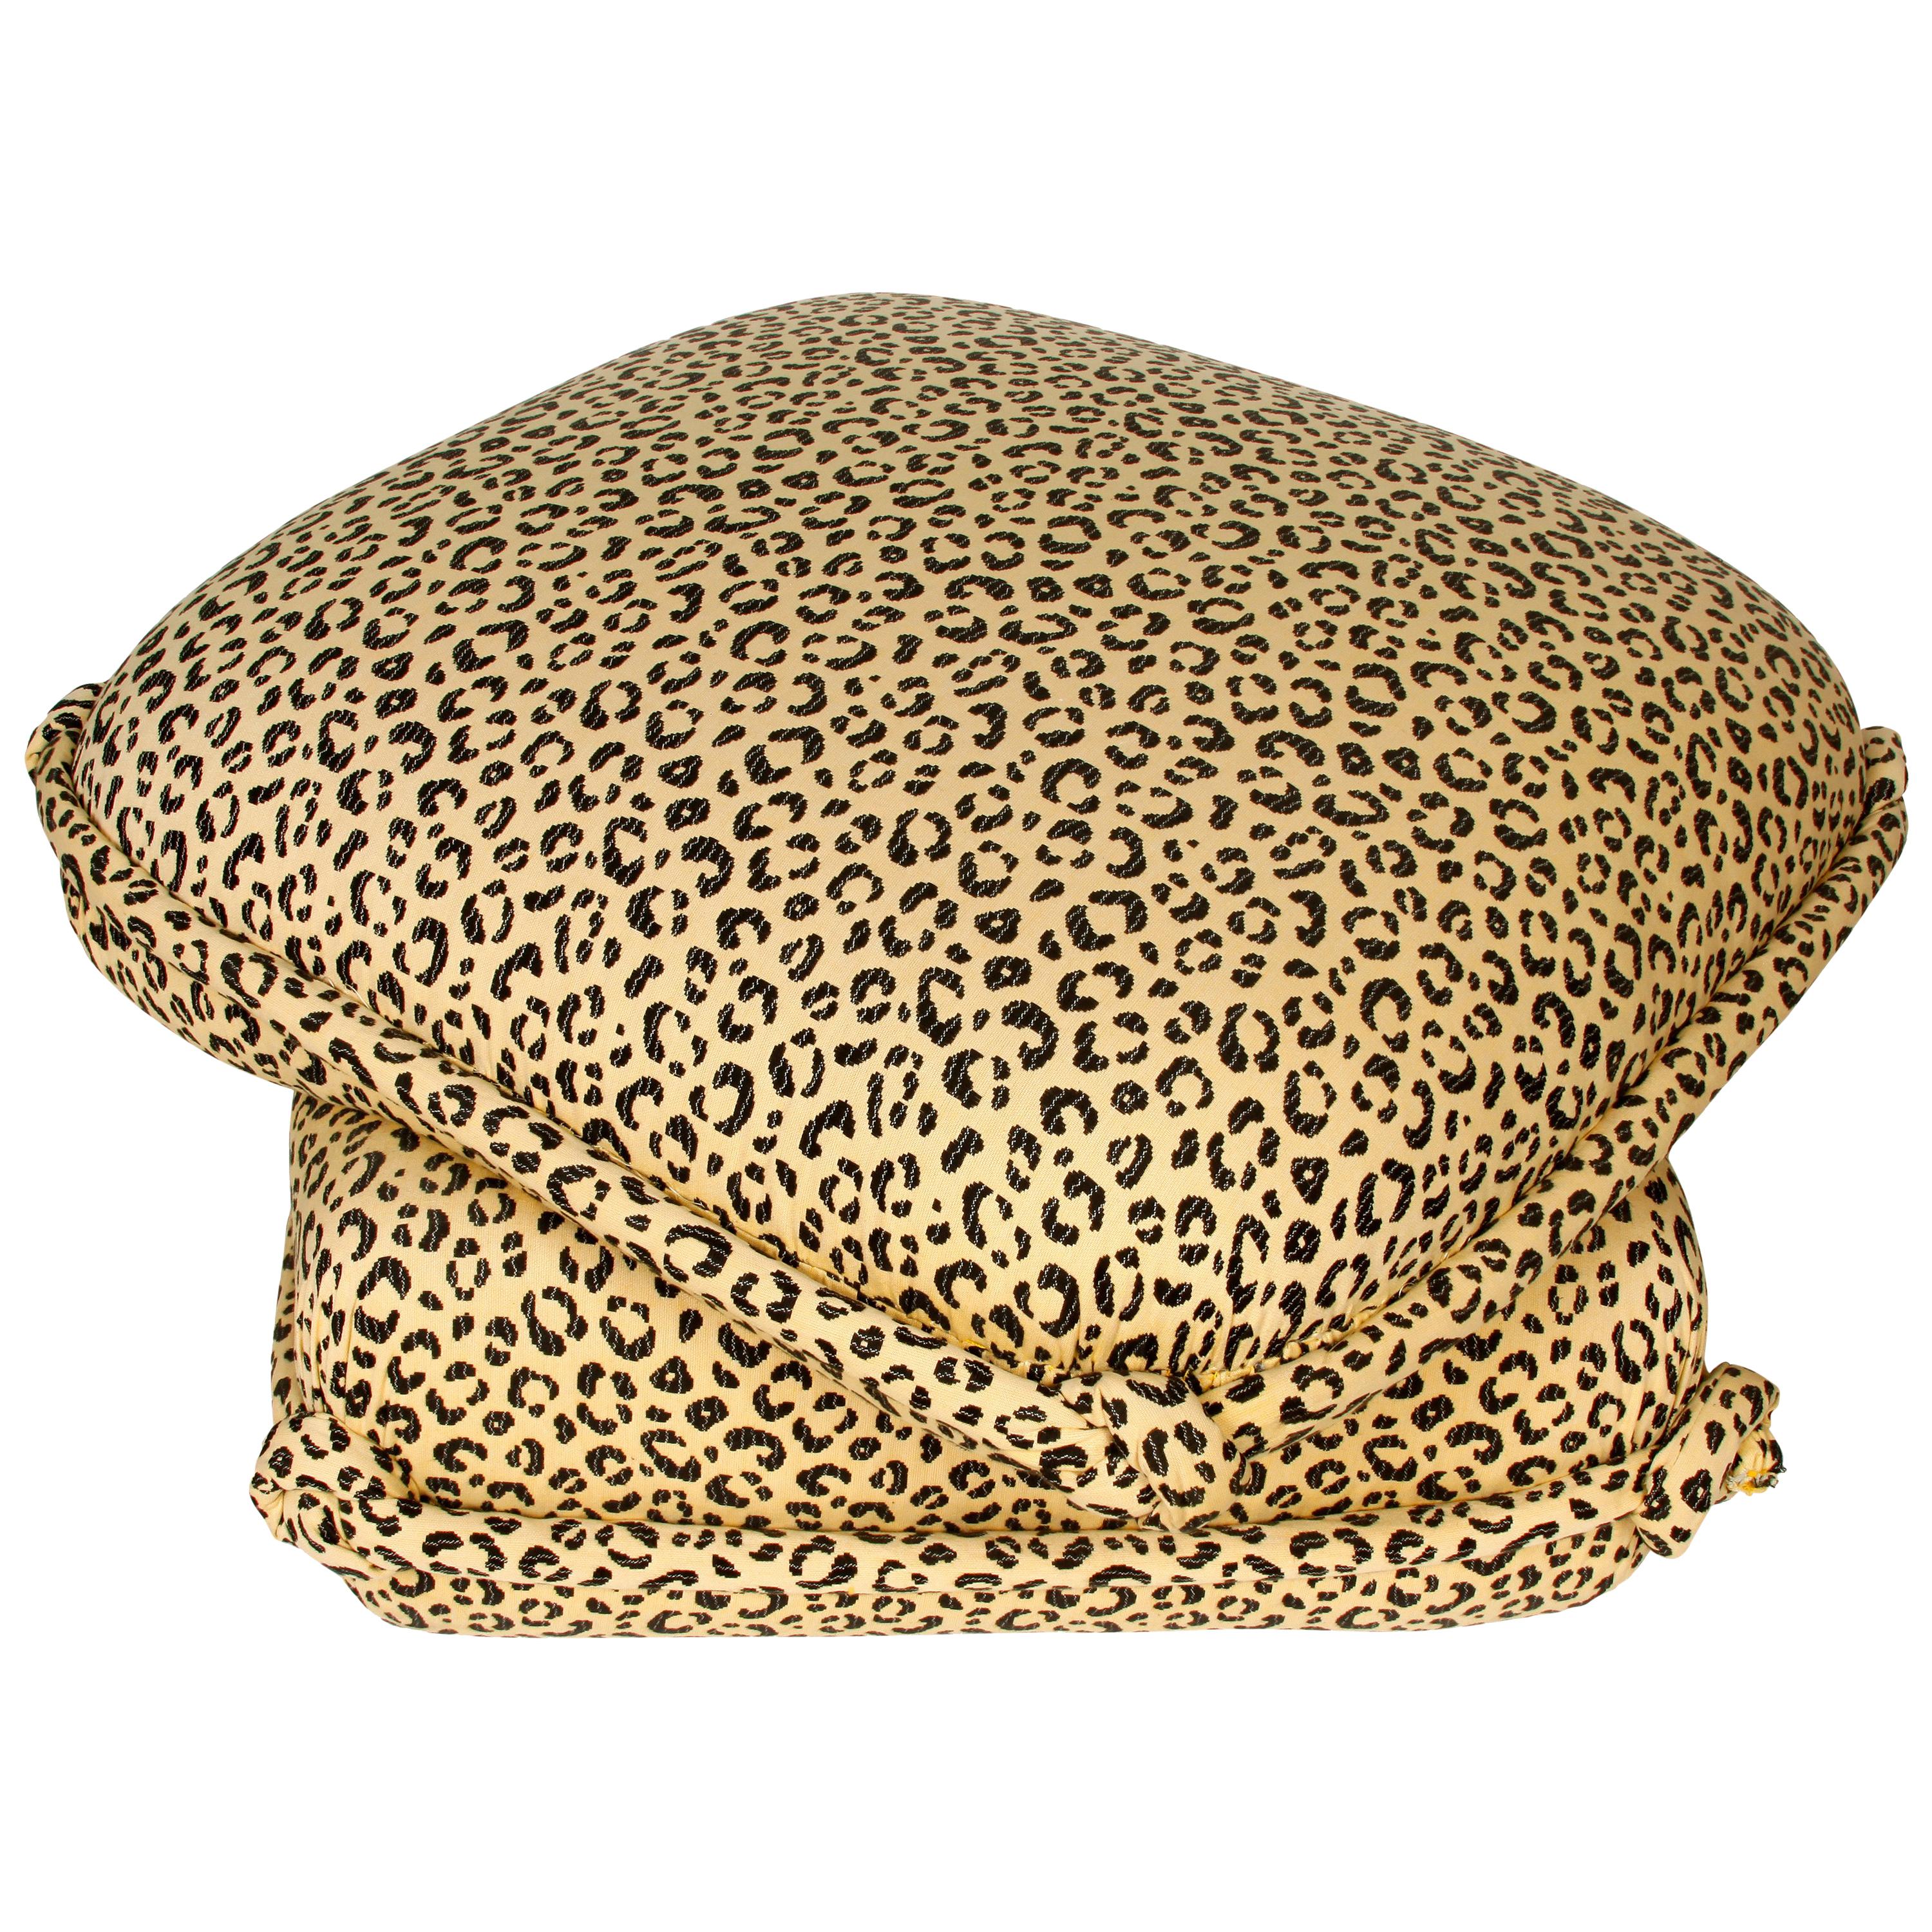 Leopard Turkish Ottoman with Knotted Corners